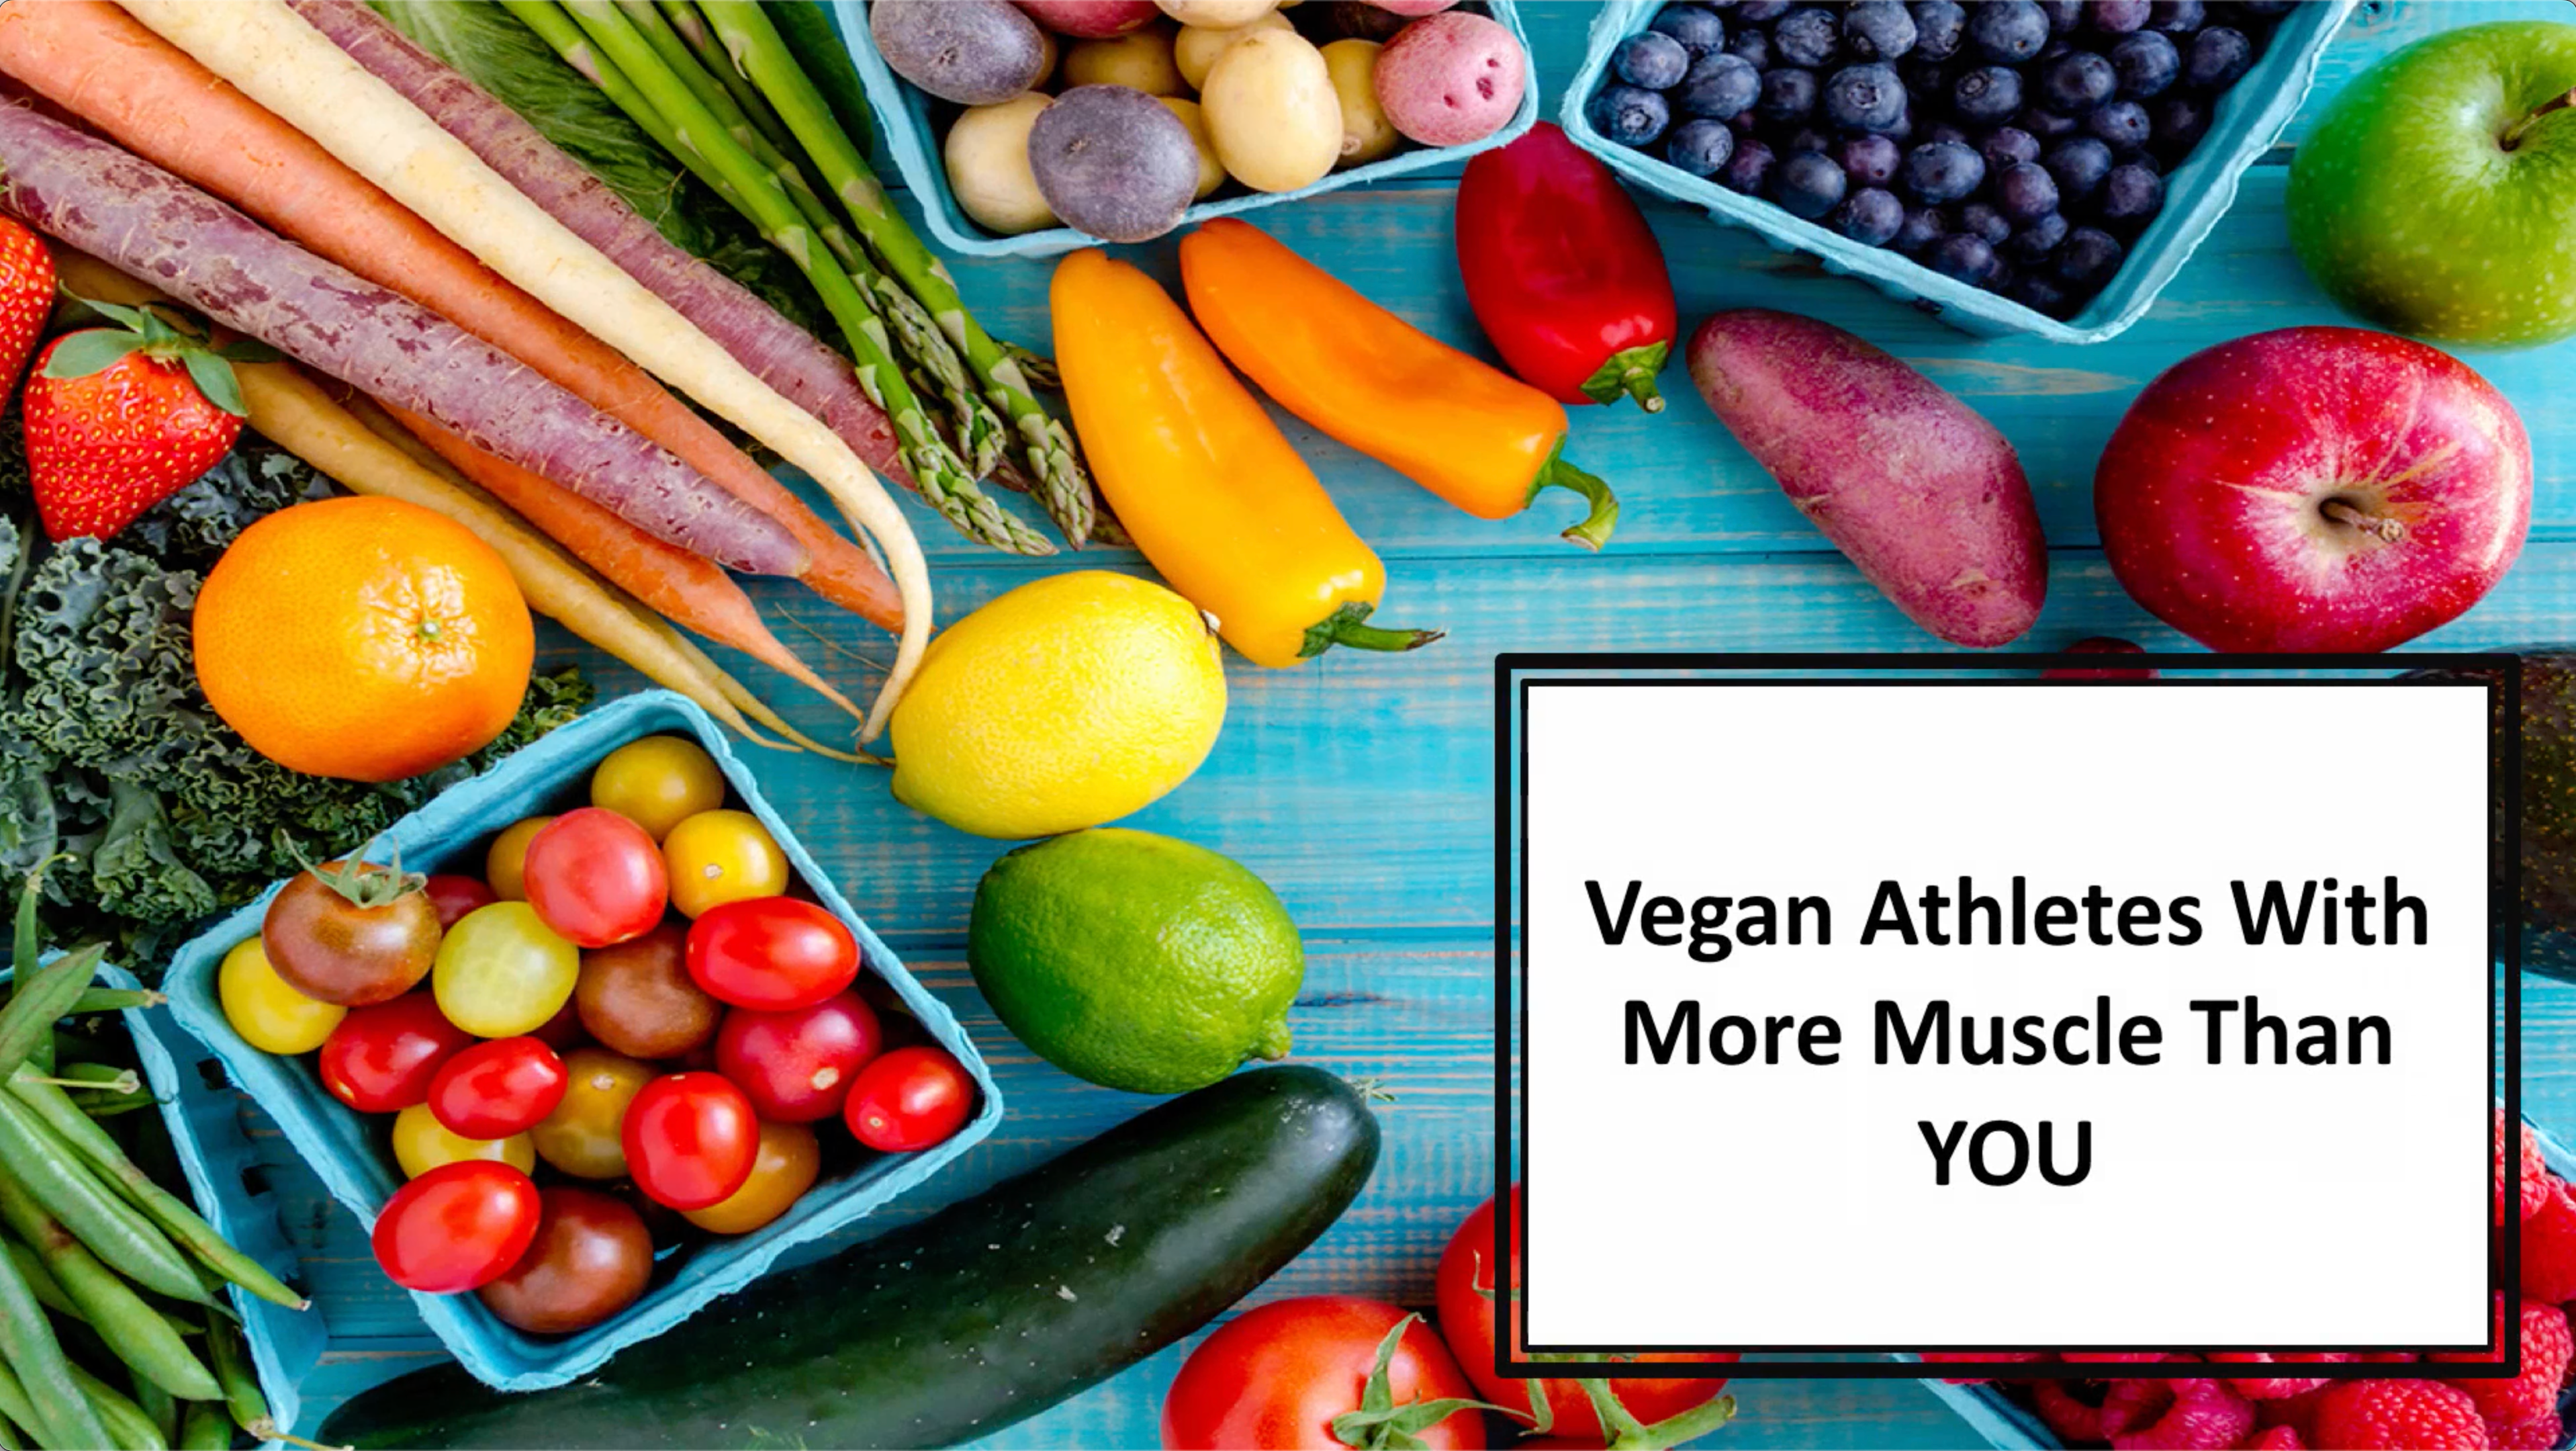 Load video: Vegan athletes with more muscle than you is the subject matter of this video.